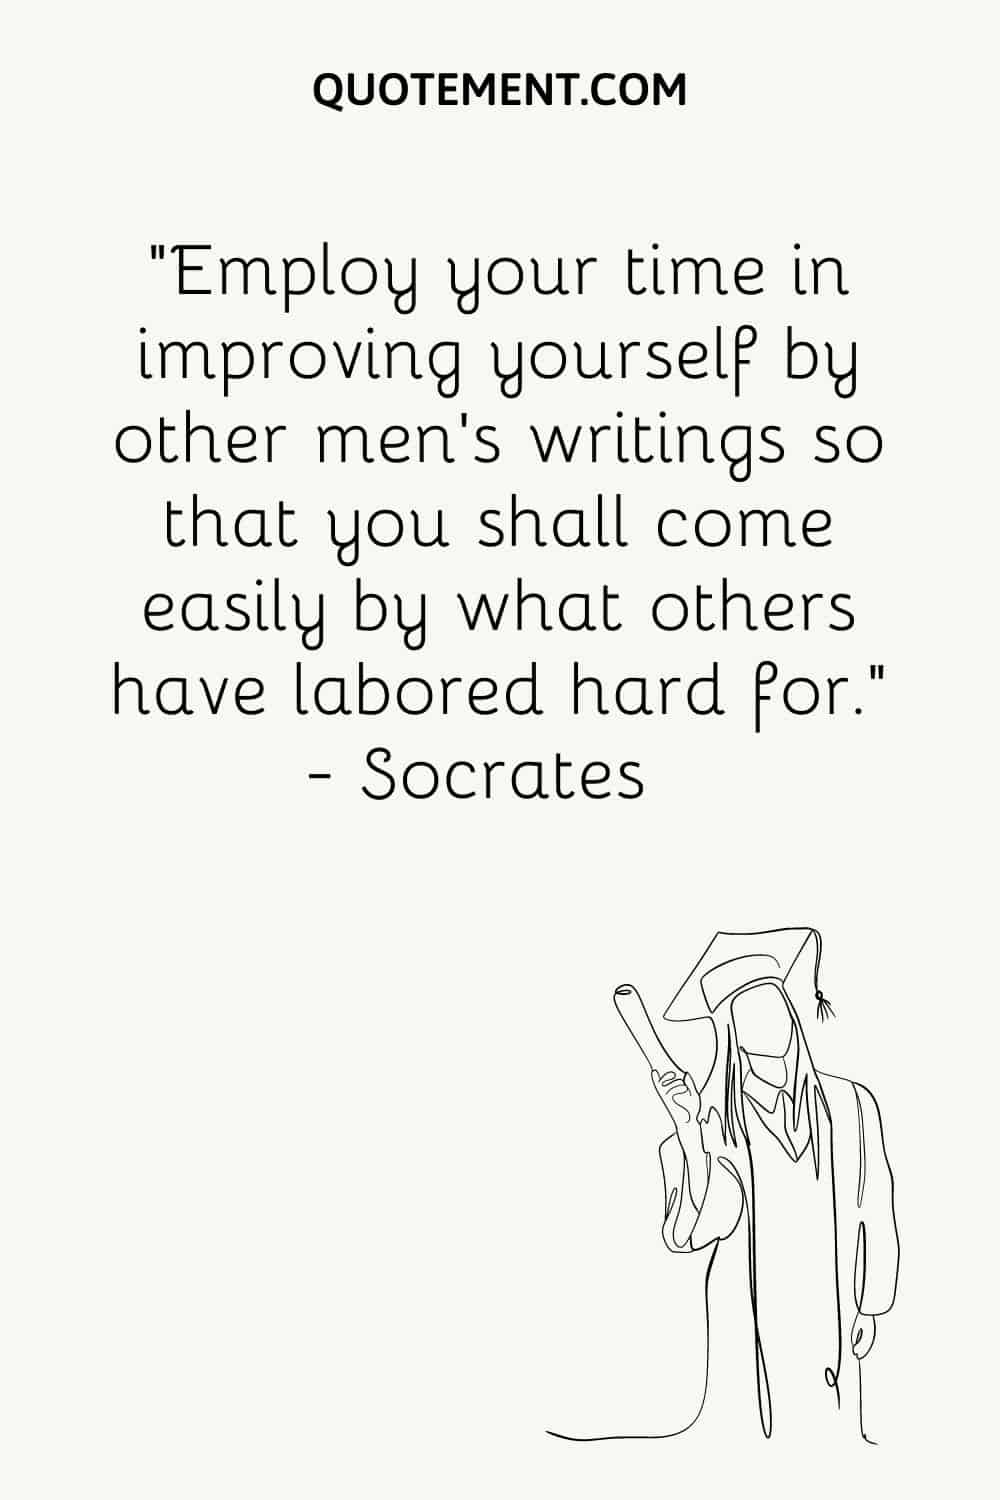 Employ your time in improving yourself by other men’s writings so that you shall come easily by what others have labored hard for.